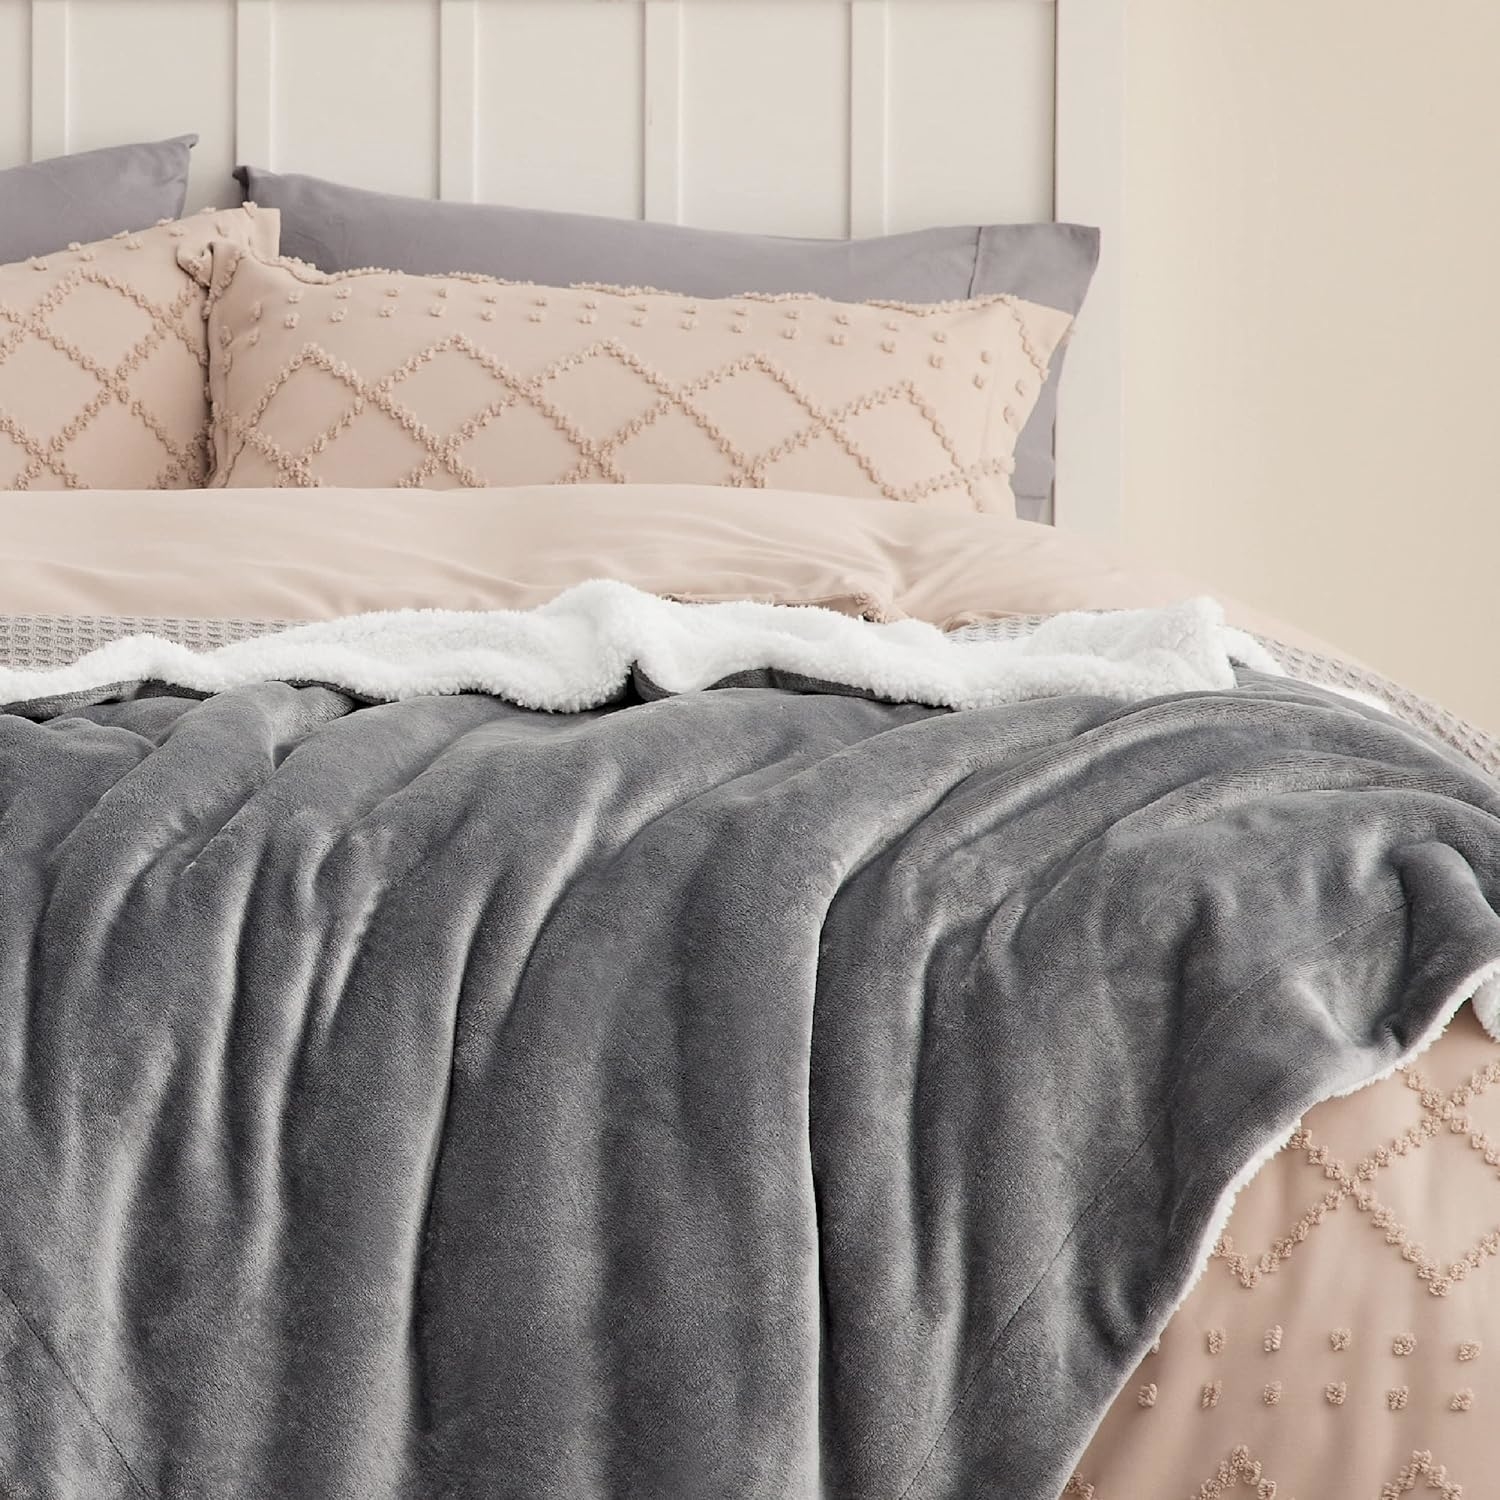 Plush gray blanket on a neatly made bed with decorative pillows